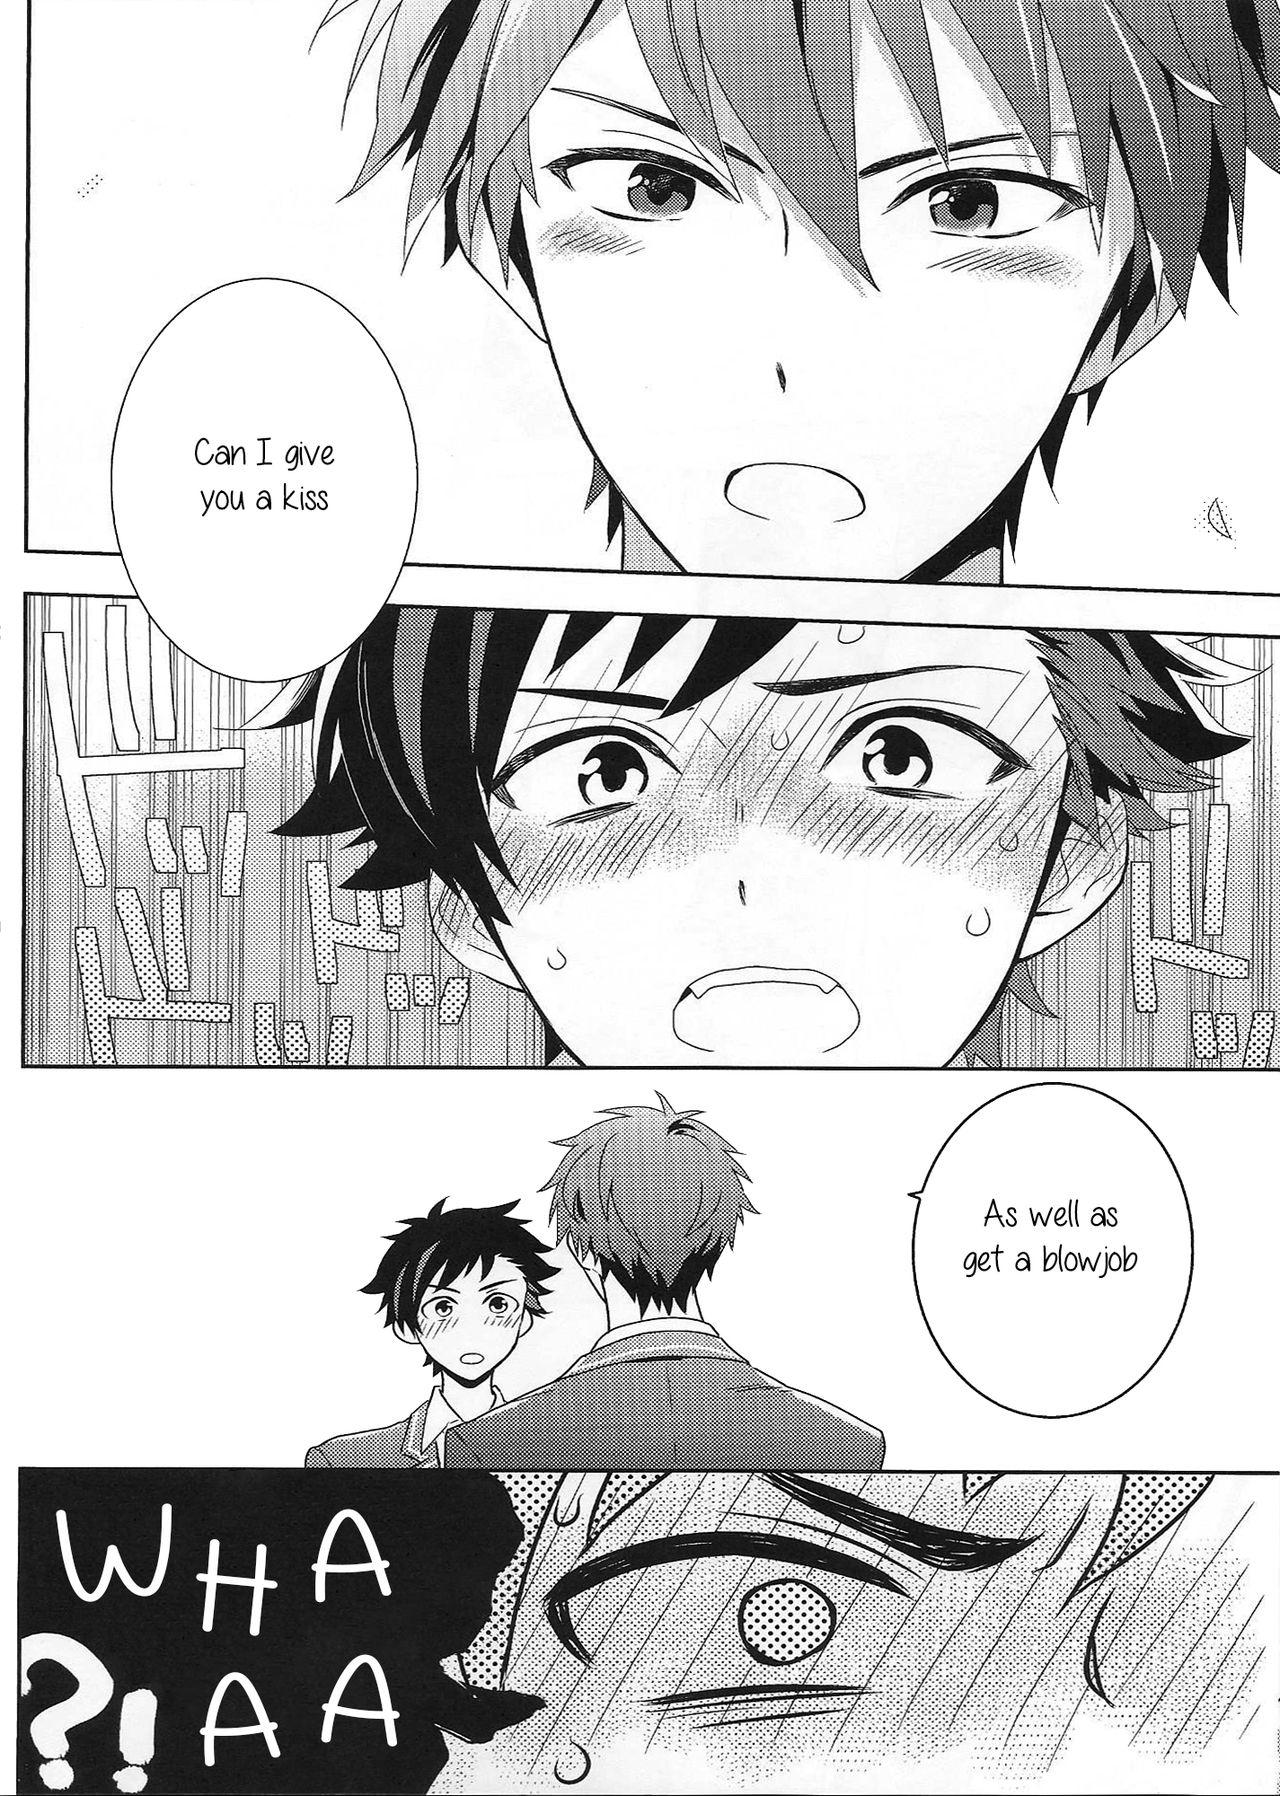 Nagumo! Isshou no Onegai da! - This Is The Only Thing I'll Ever Ask You! 8